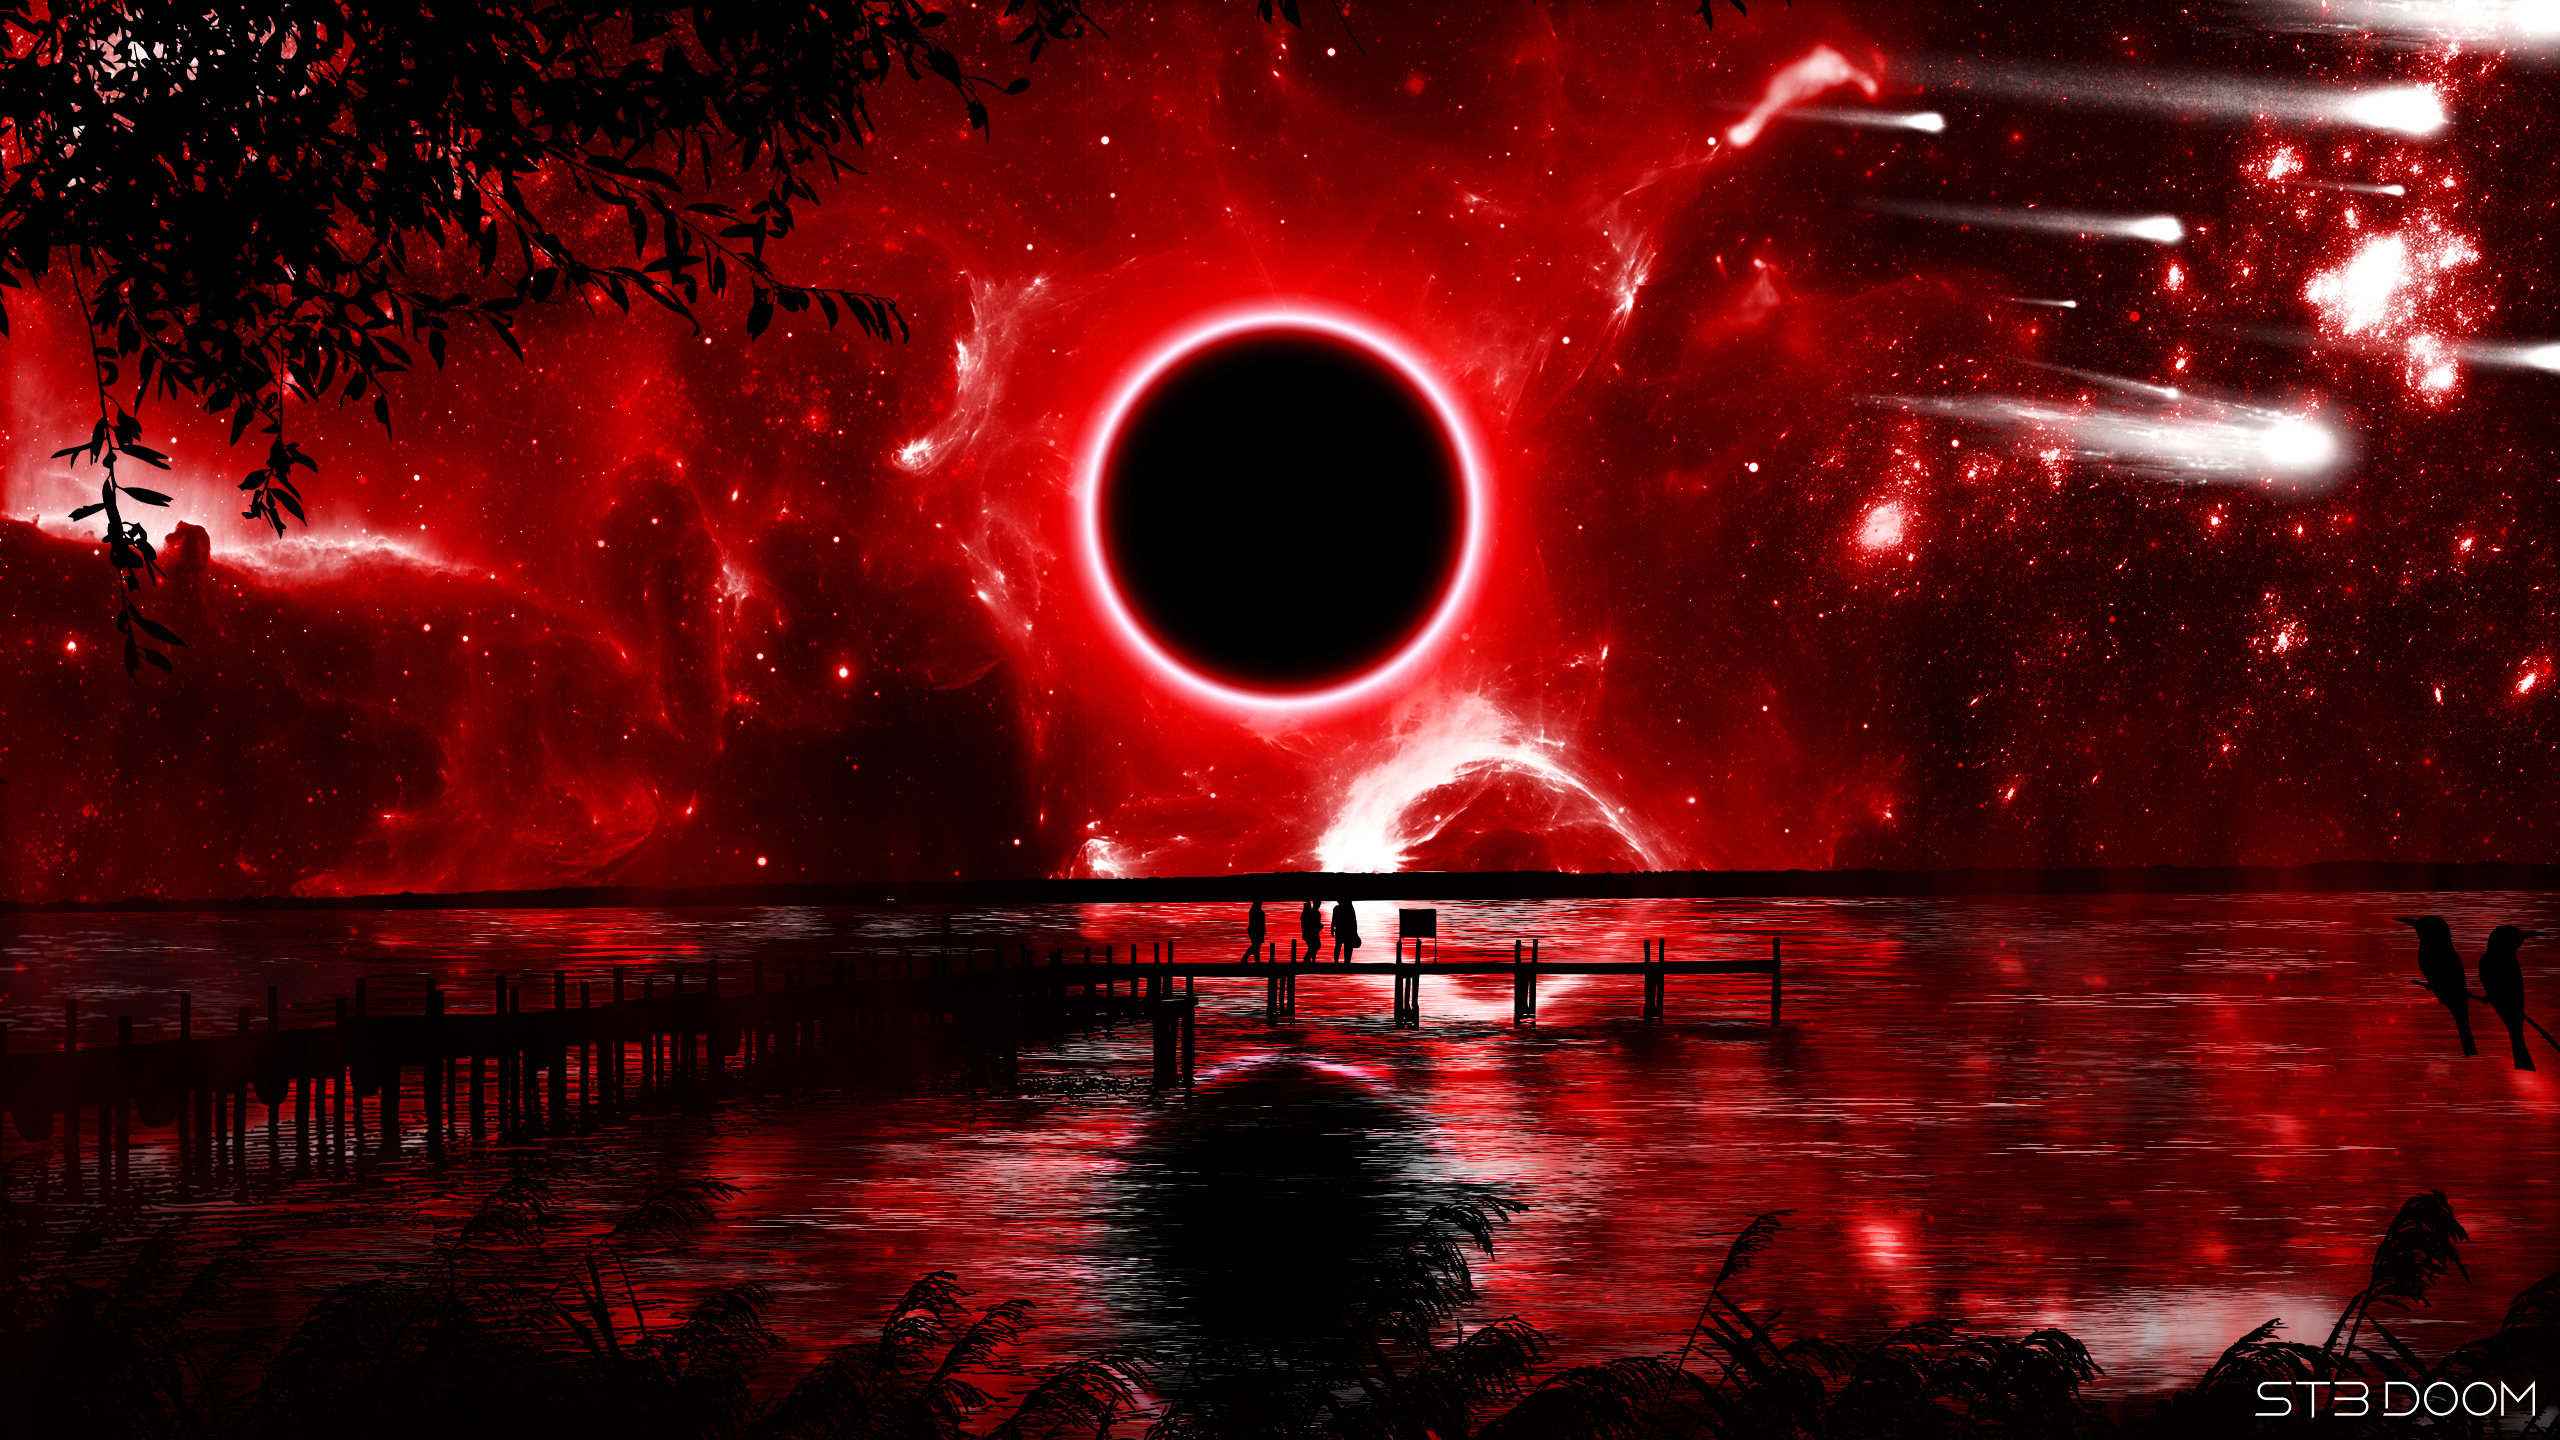 Red Eclipse Digital Art Wallpaper Hd Space 4k Wallpapers Images And